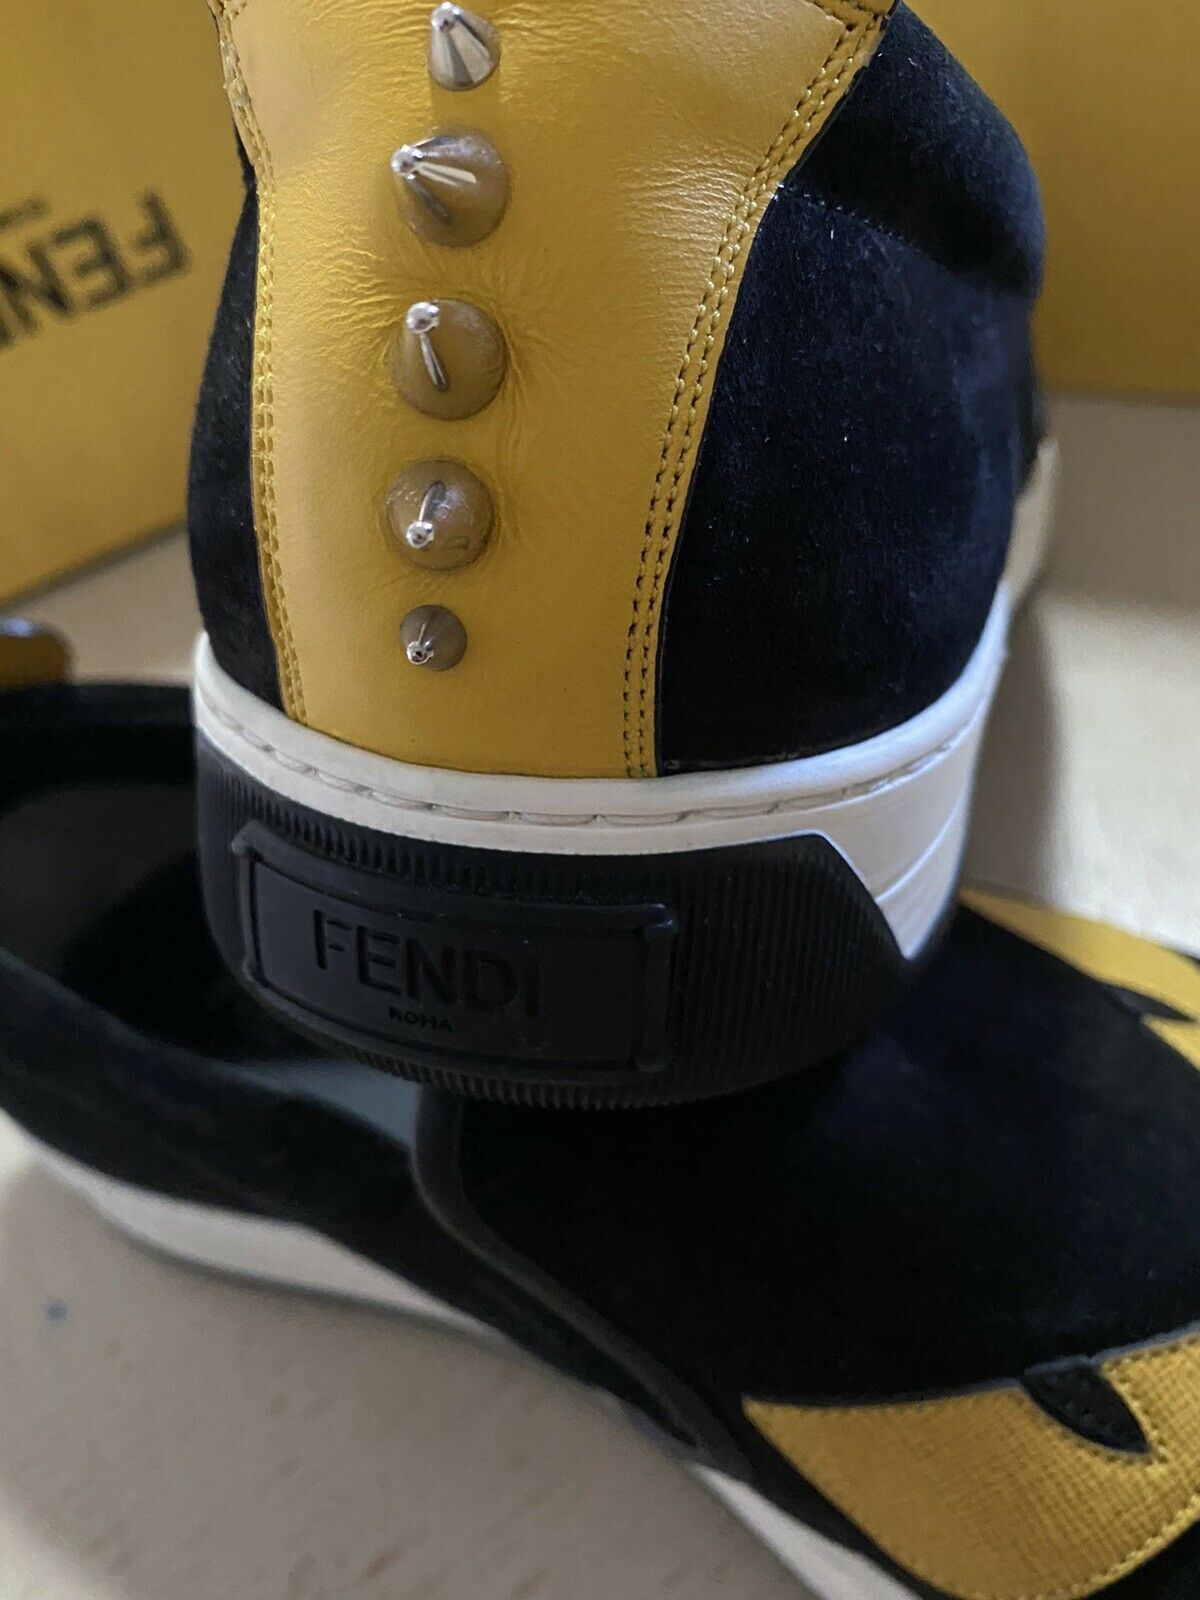 New $700 Fendi Men Monster Suede/Leather Sneakers Shoes Black/Yellow 12 US Italy